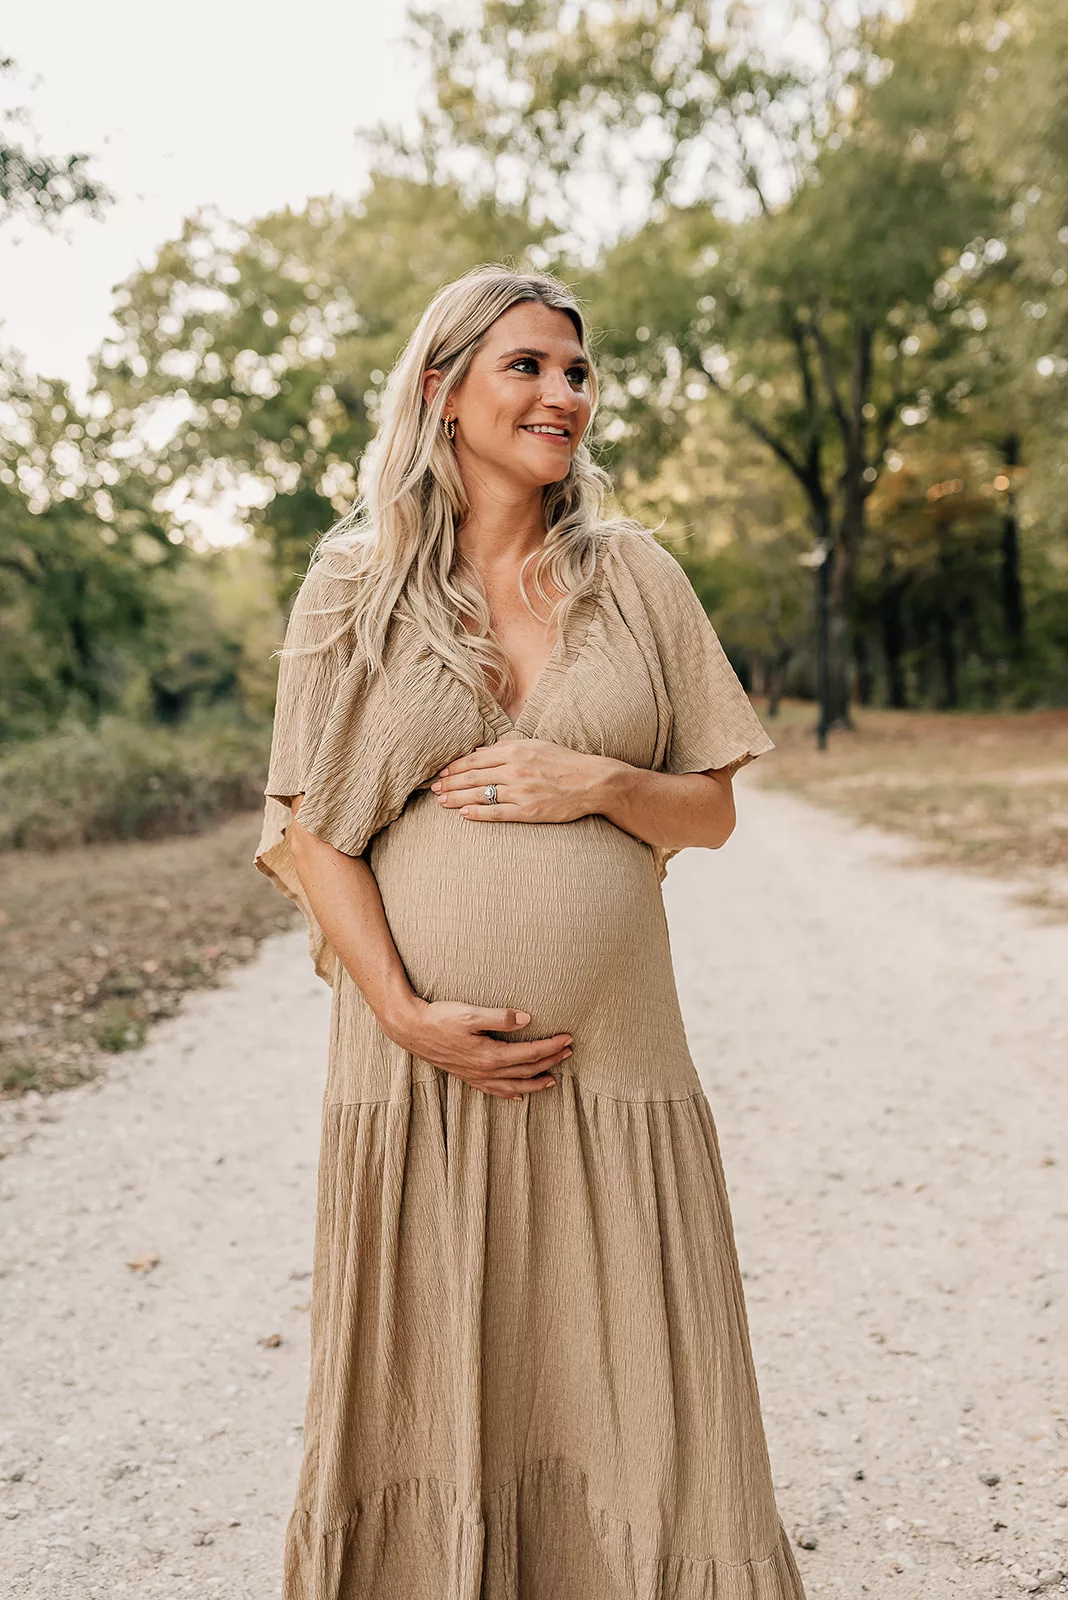 A mom to be smiles while walking down a park path holding her bump before meeting a Houston Postpartum Doula